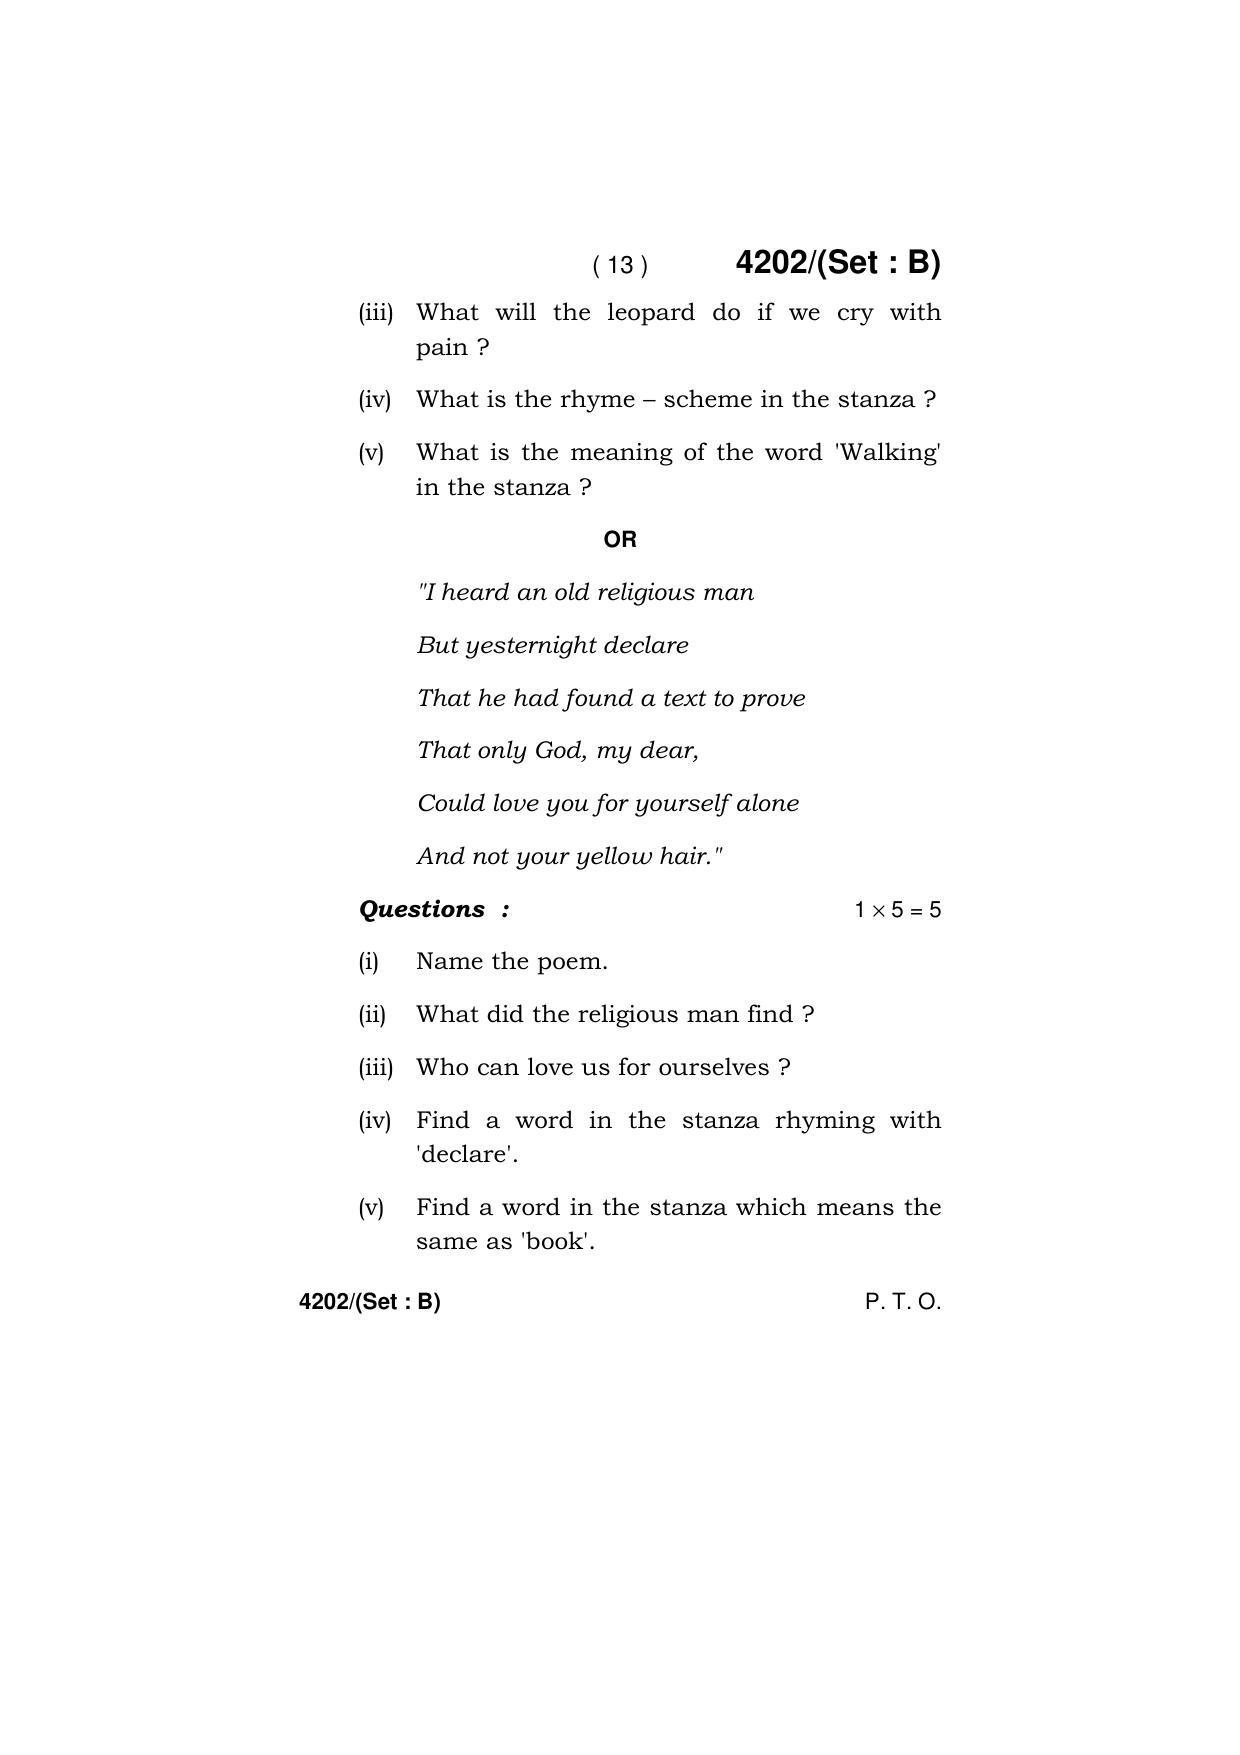 Haryana Board HBSE Class 10 English (All Set) 2019 Question Paper - Page 29